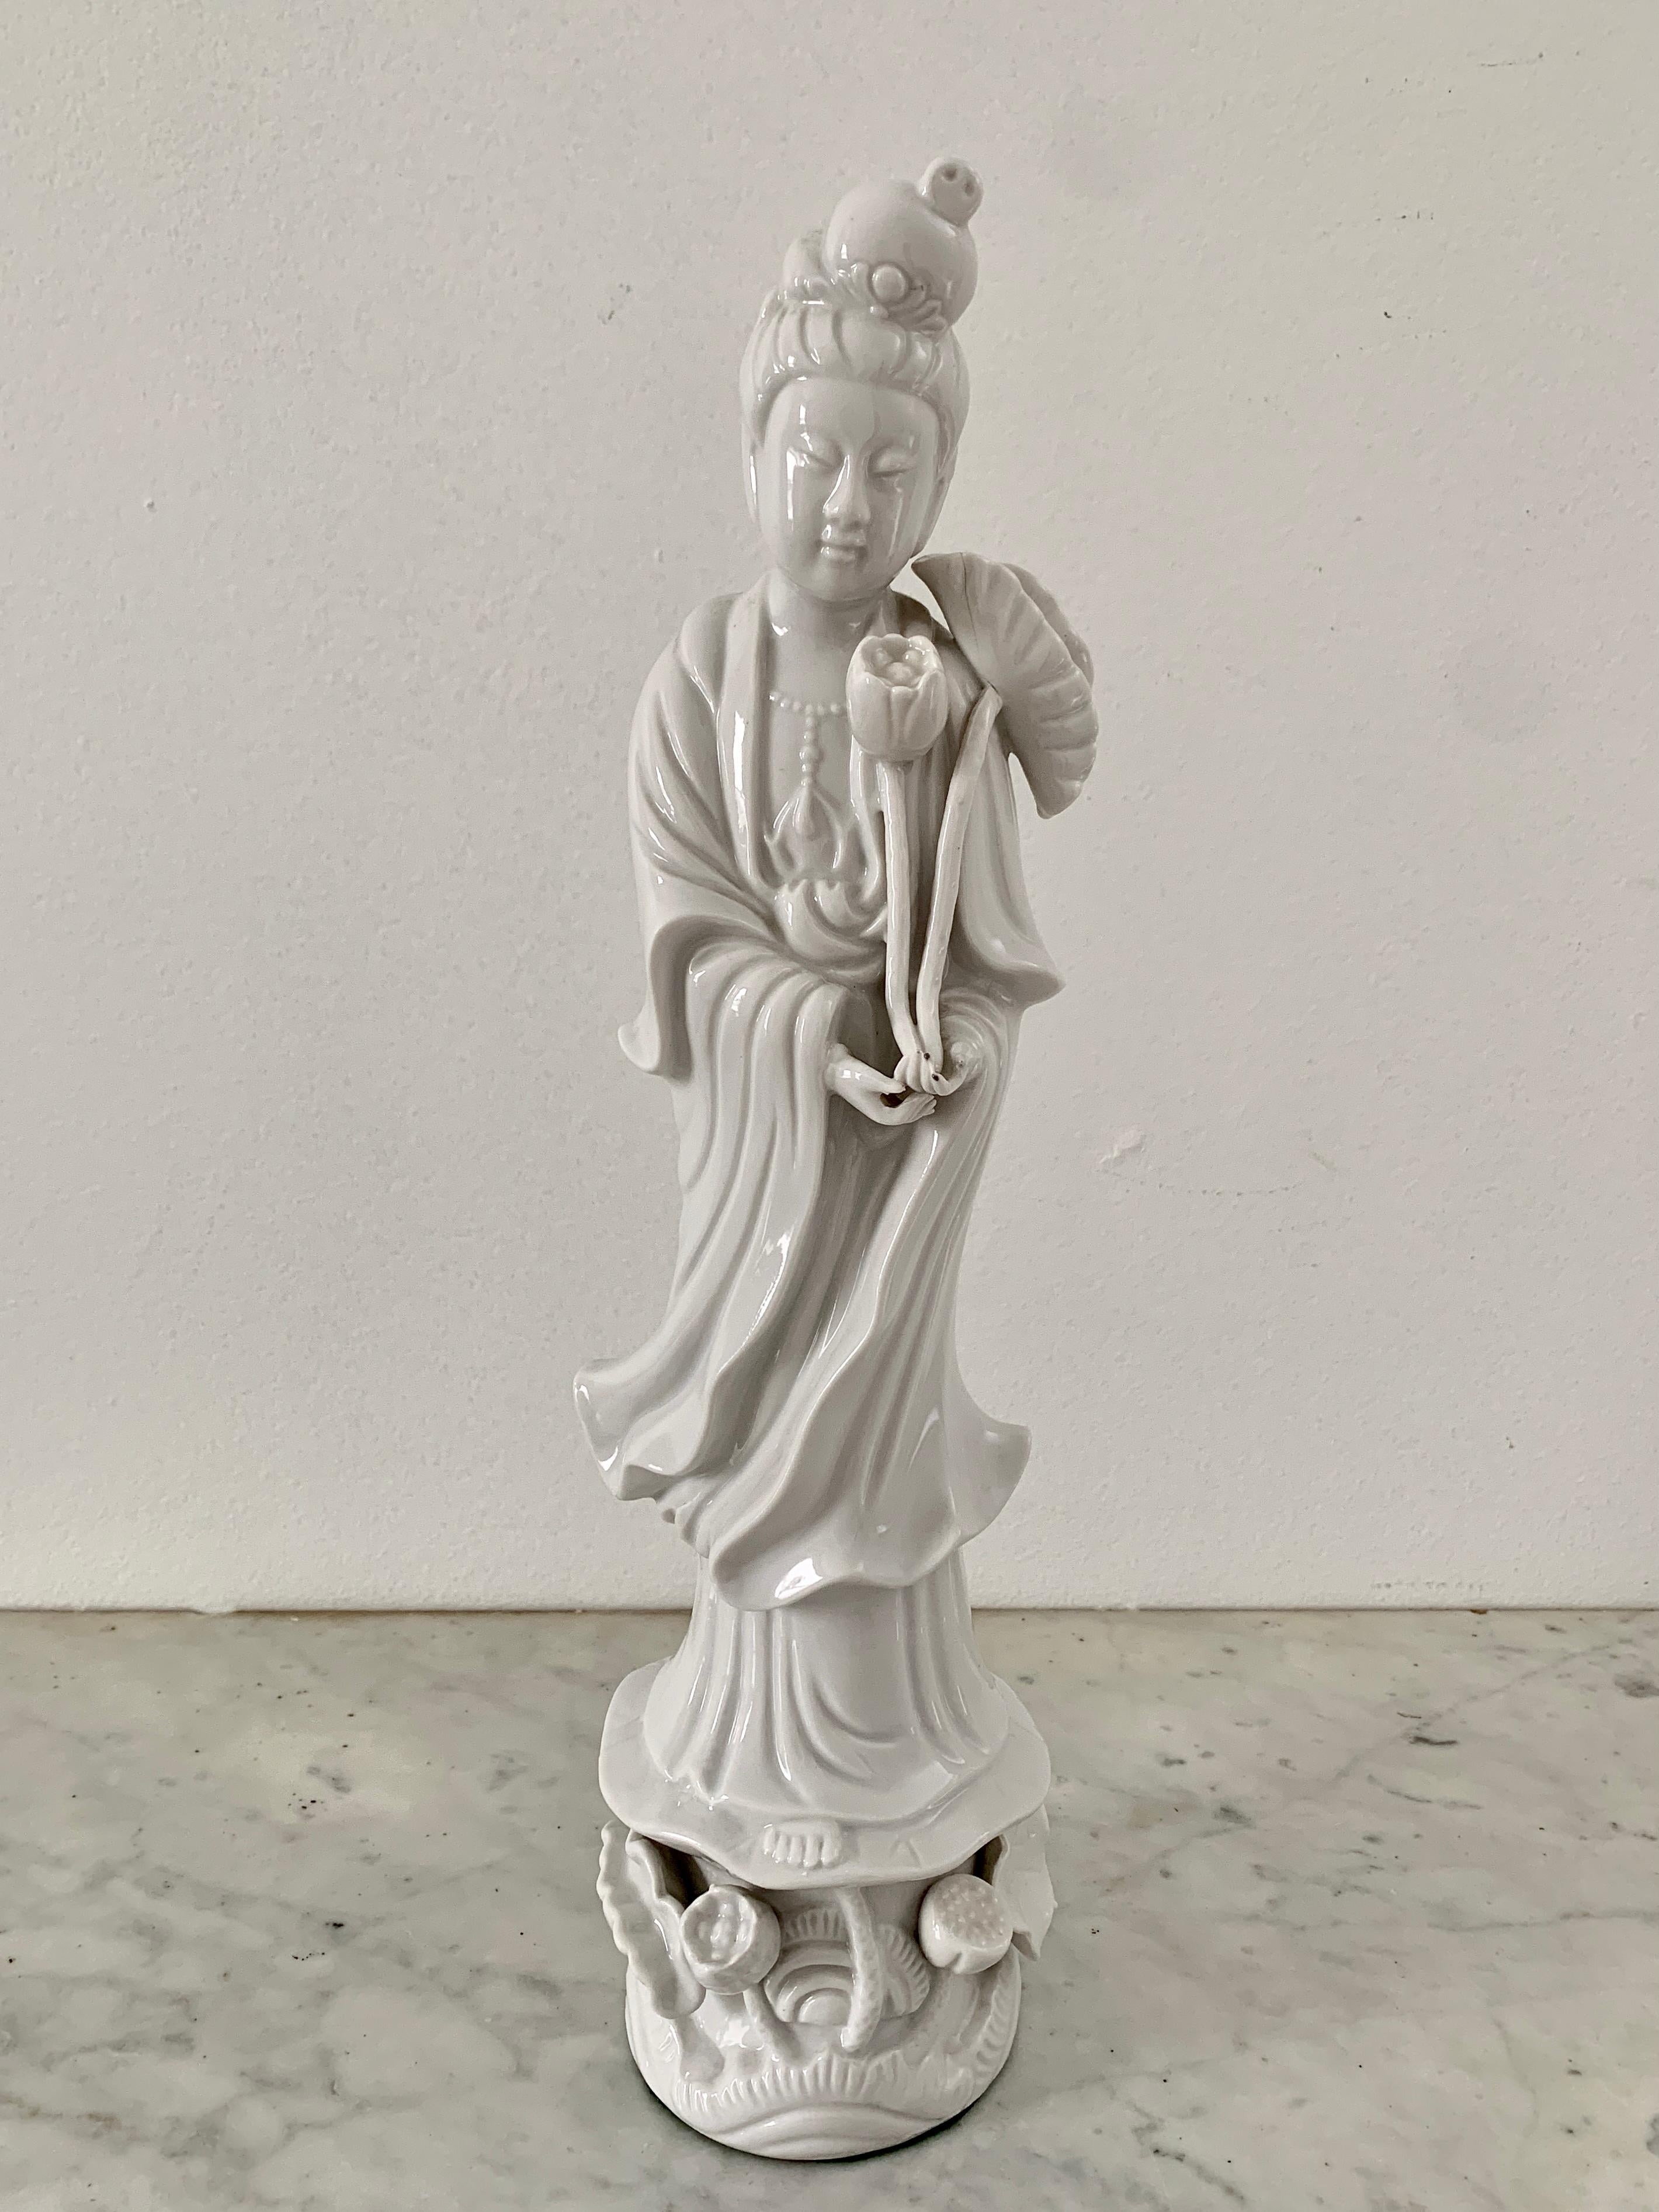 A set of 7 vintage porcelain Blanc de Chine figures of Kwan Yin or Quanyin, the Chinese goddess of mercy. 

Mid-20th Century

The heights in descending order are 14.5